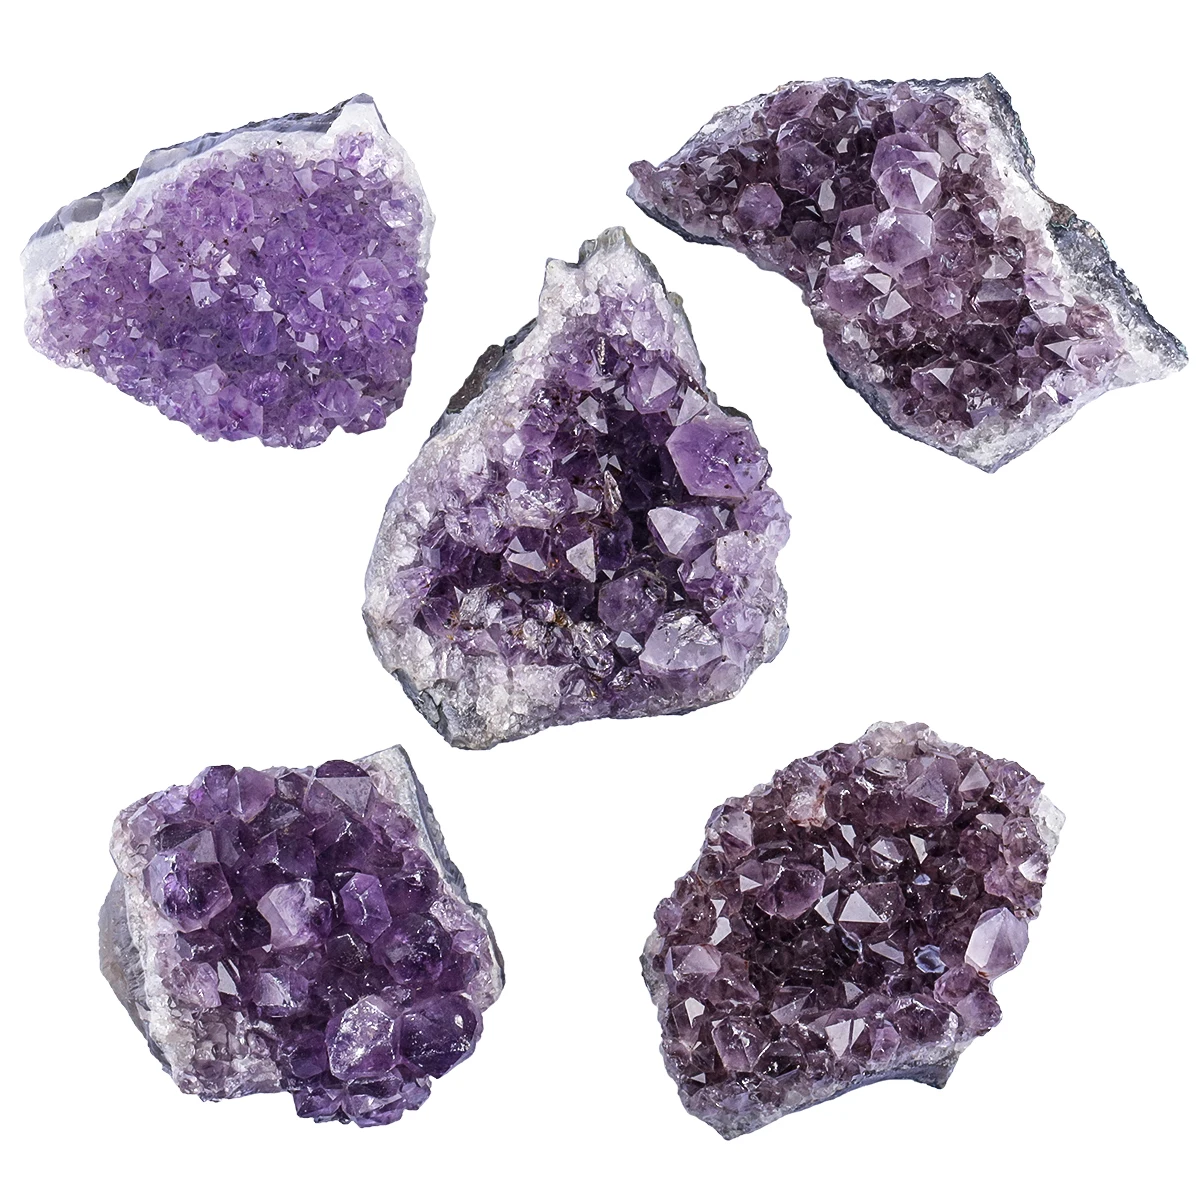 400g Natural Amethyst Cluster Healing Rough Gemstone Mineral Specimen Chakra Balancing For Home Decoration tumbeelluwa natural rough amethyst base luck money tree reiki healing crystal chips gravel minerals home decoration diy gift